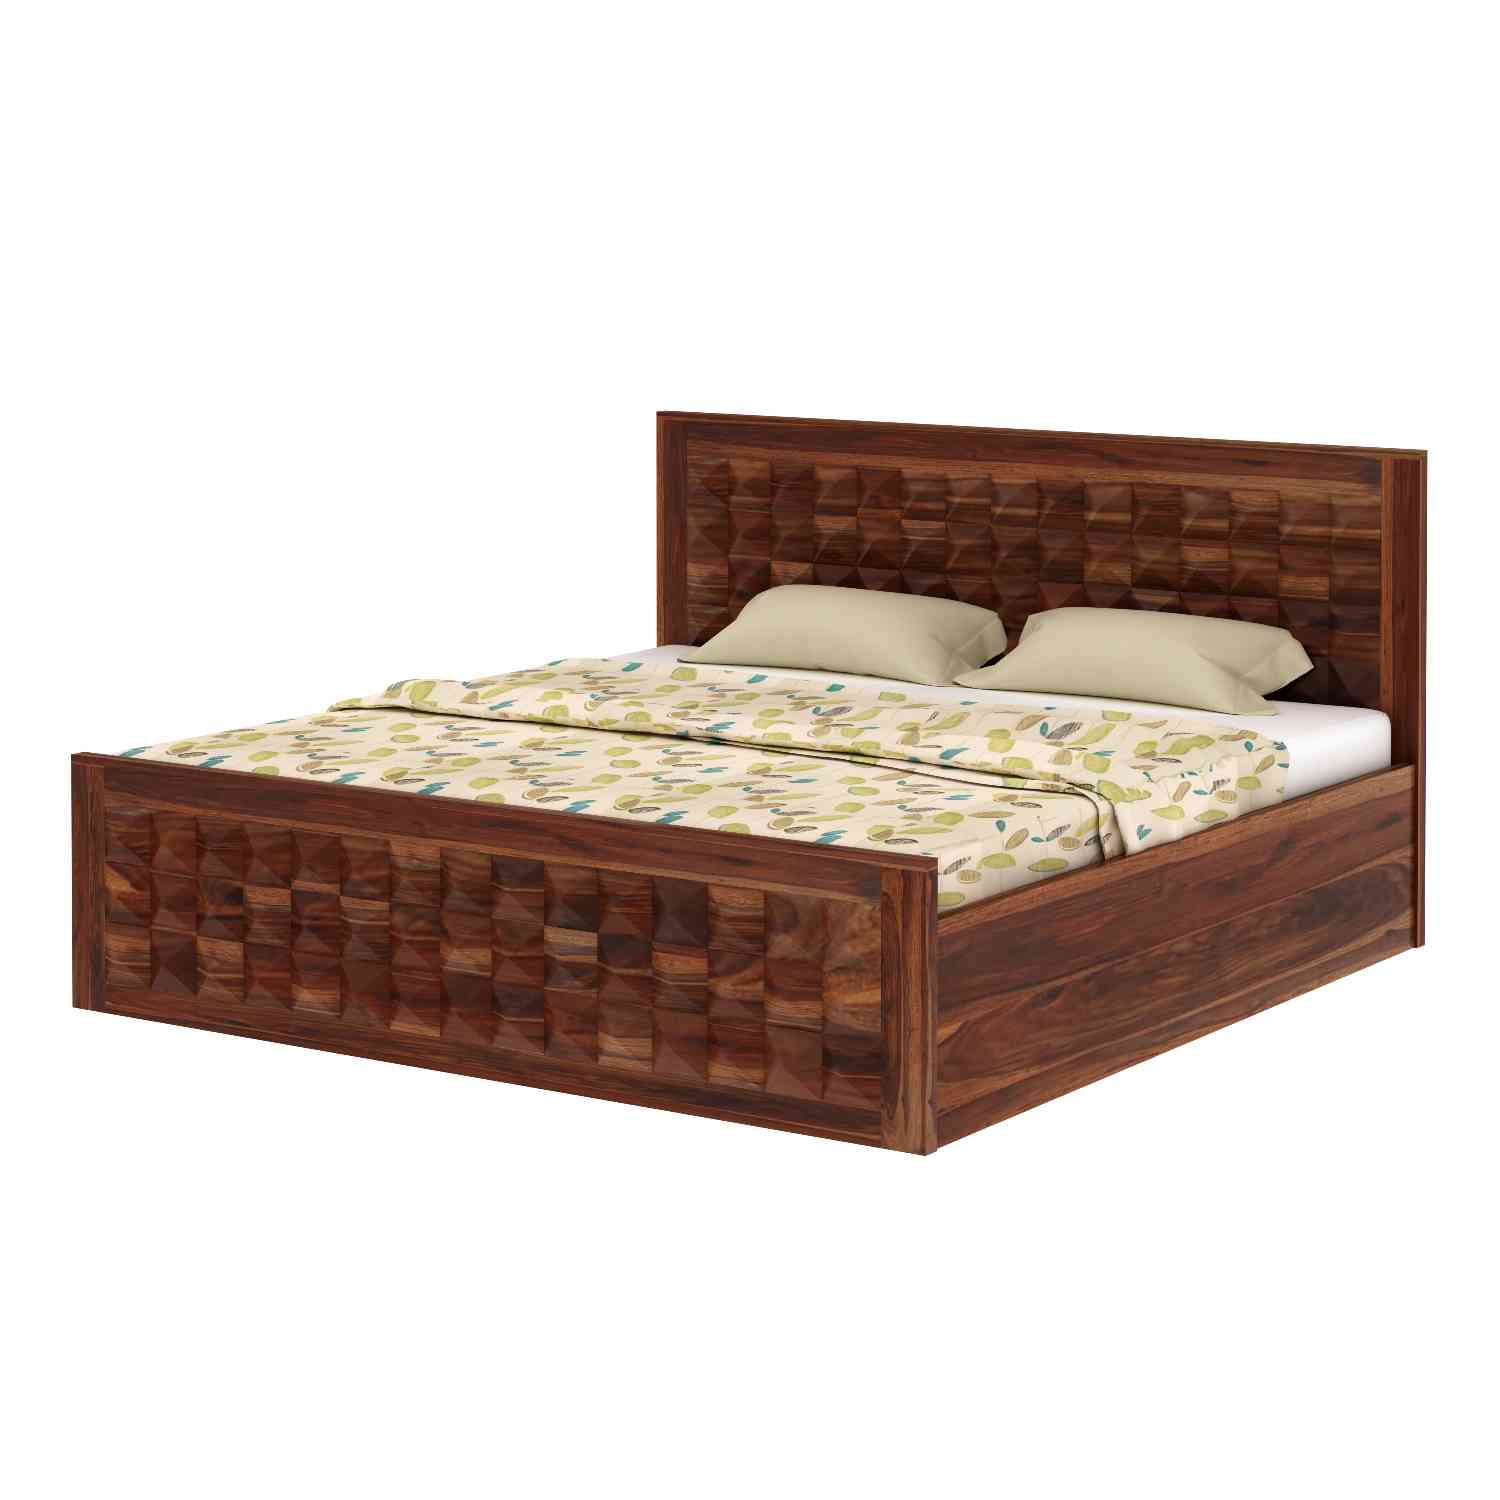 Sofia Solid Sheesham Wood Bed With Box Storage (Queen Size, Natural Finish)